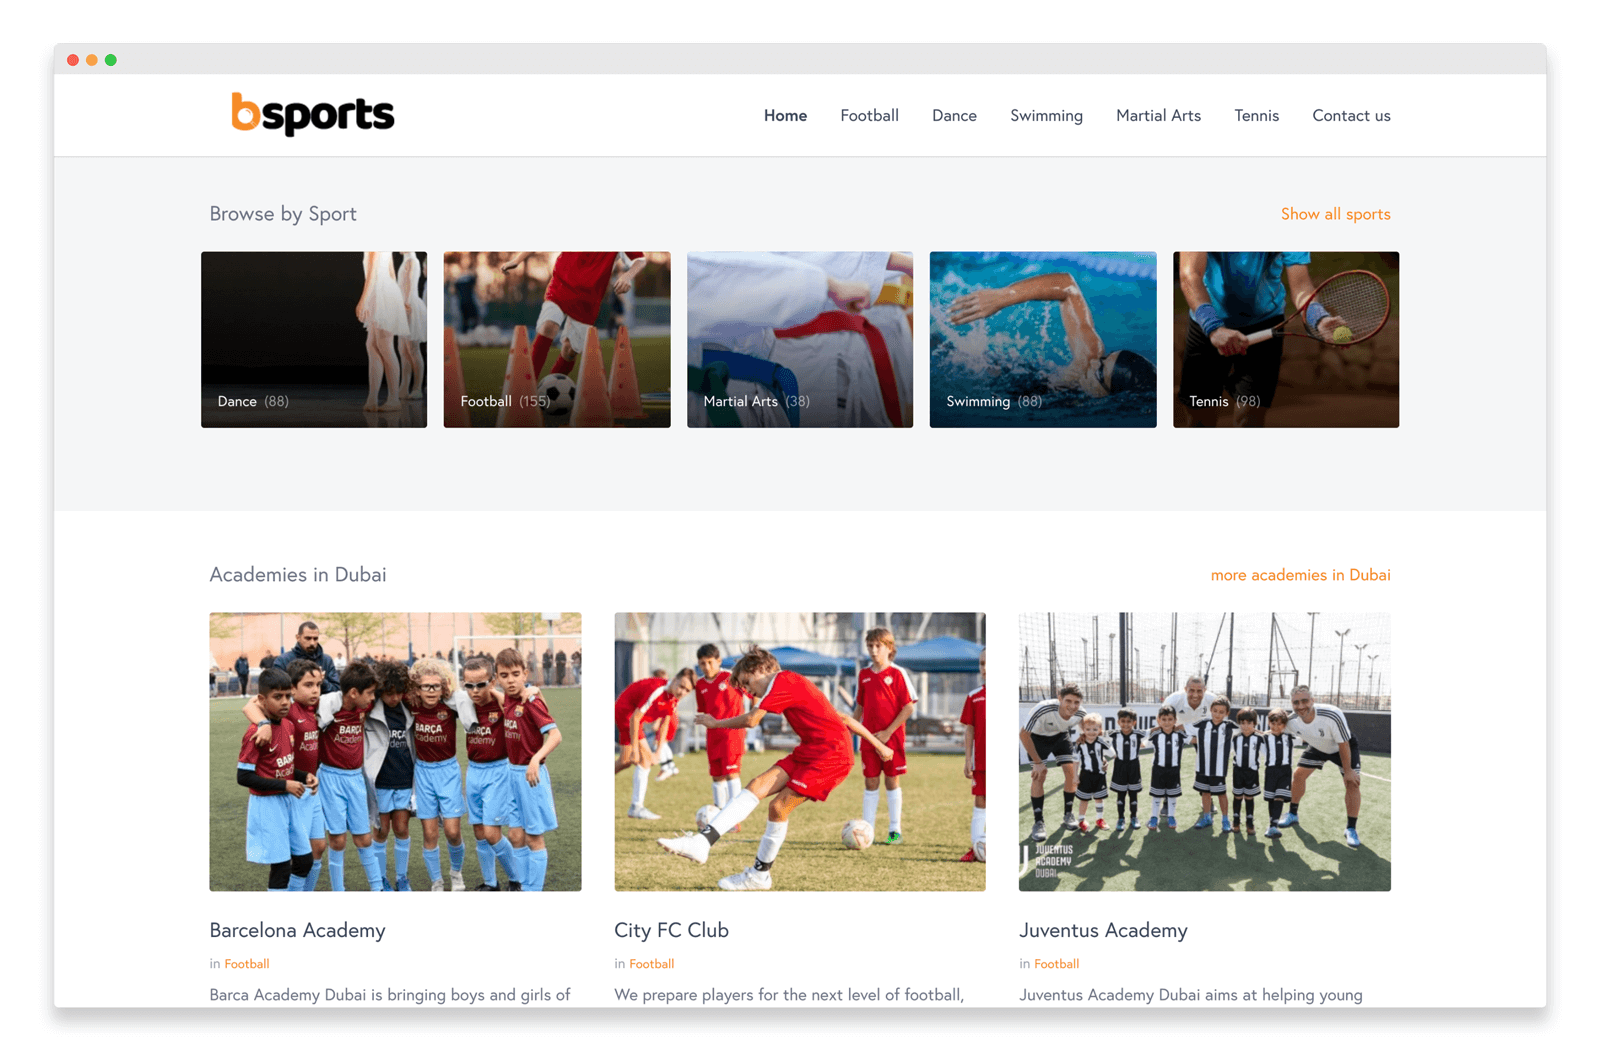 bsports home page browsing options.